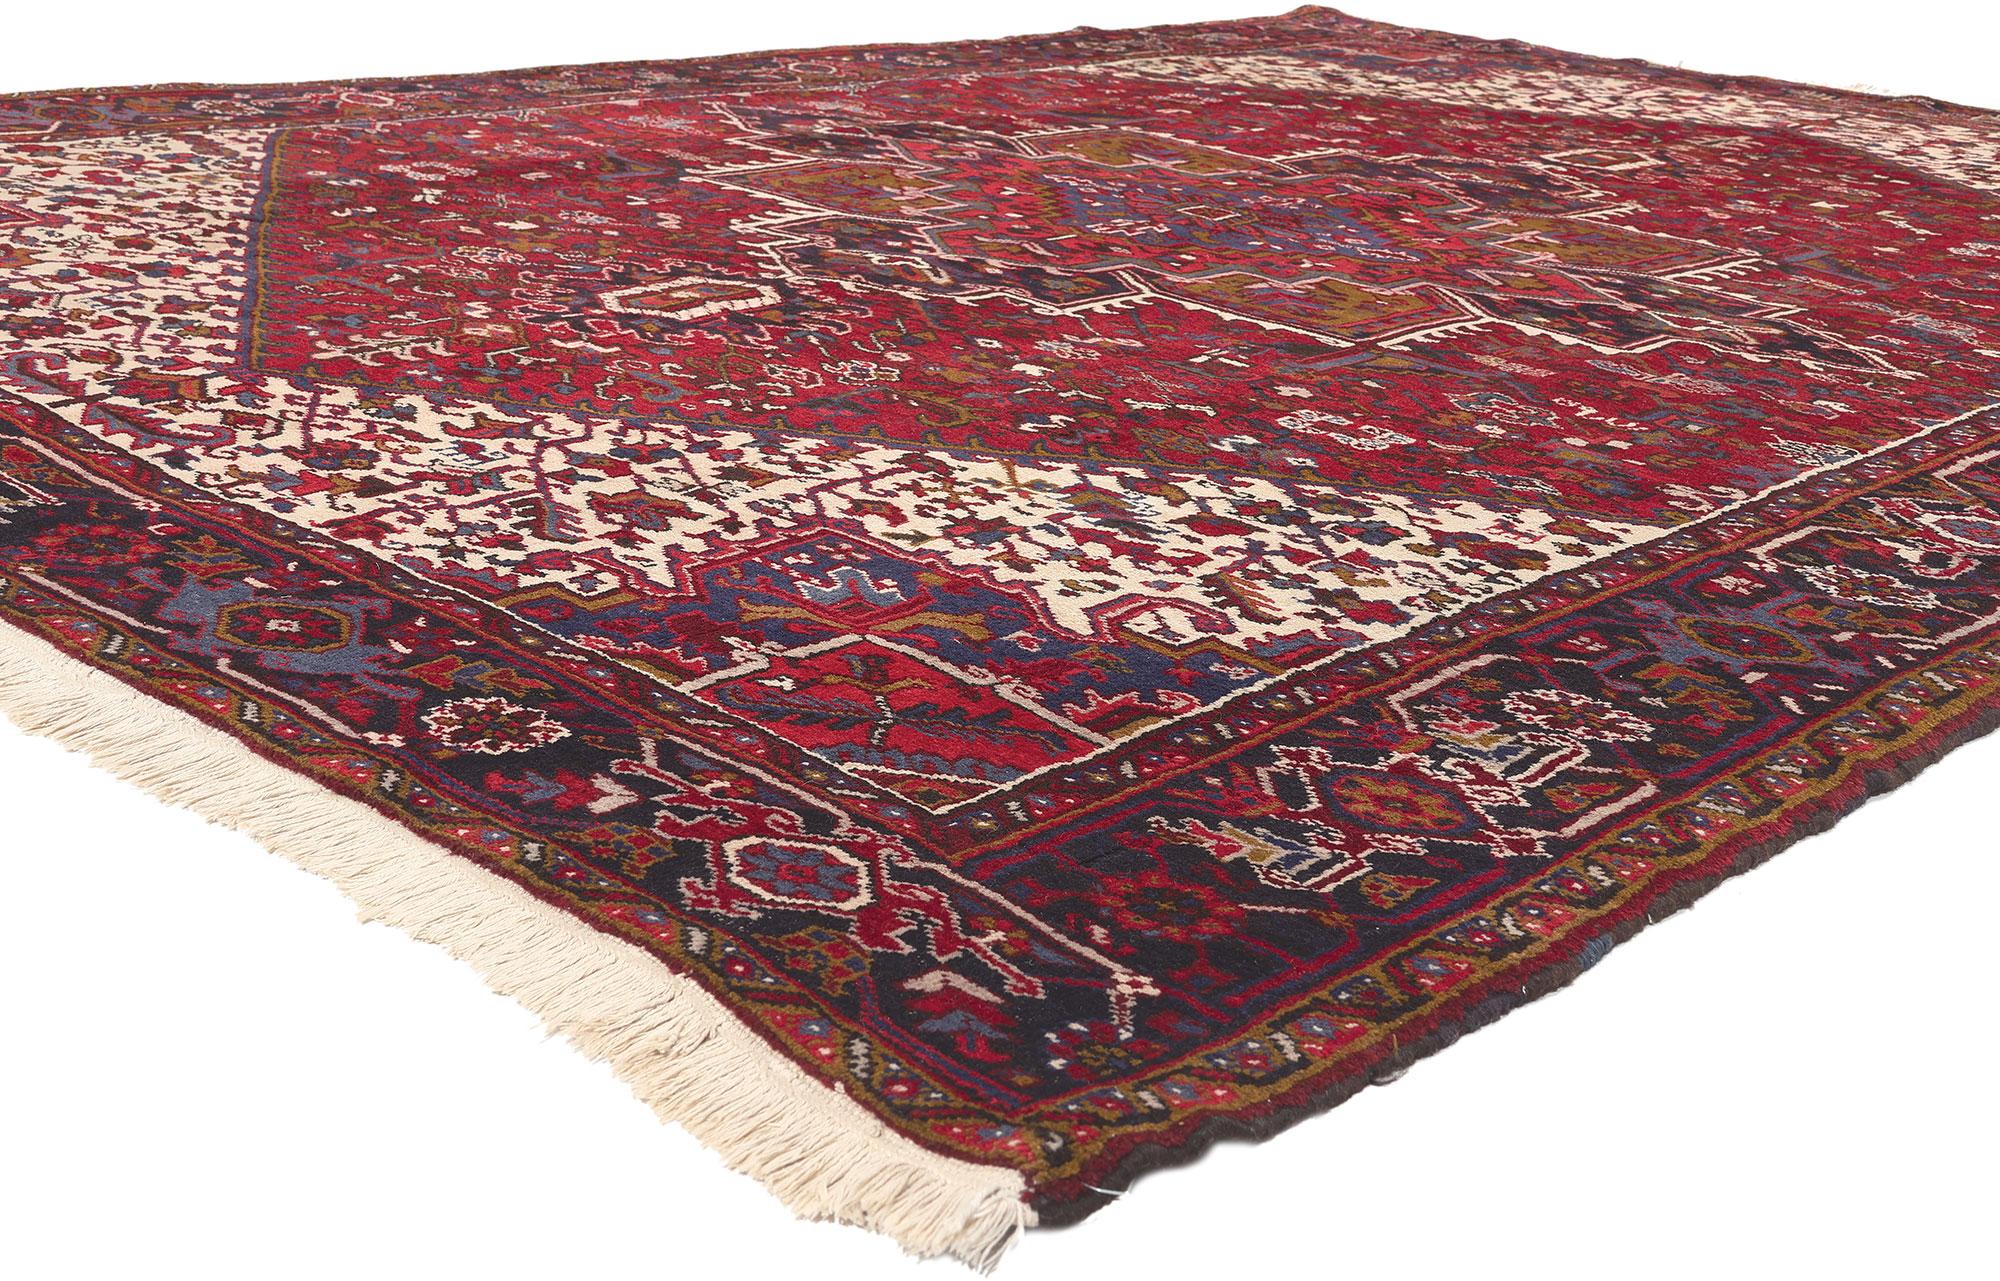 60307 Vintage Persian Heriz Rug, 08'10 x 12'01. 
Perpetually posh meets timeless elegance in this vintage Persian Heriz rug. The sophisticated geometric design and classic color palette woven into this piece work together creating a modern yet